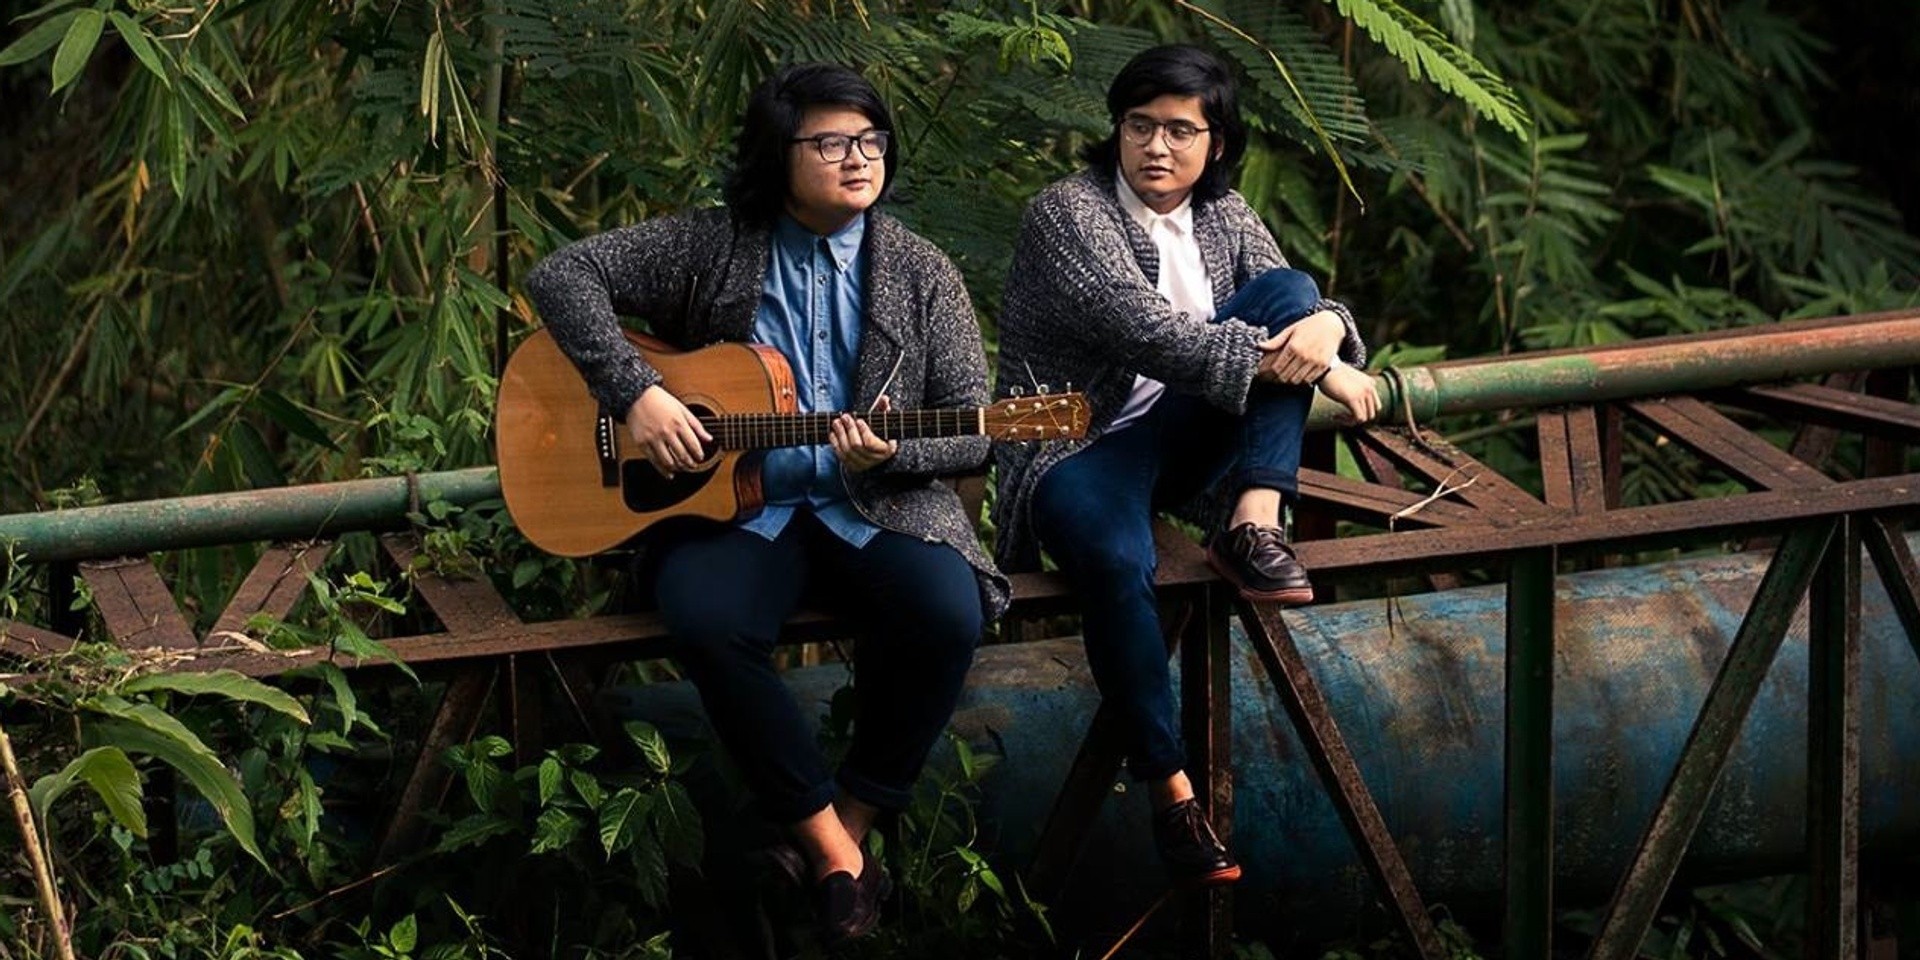 Sibling duo Ben & Ben to release their first EP next month